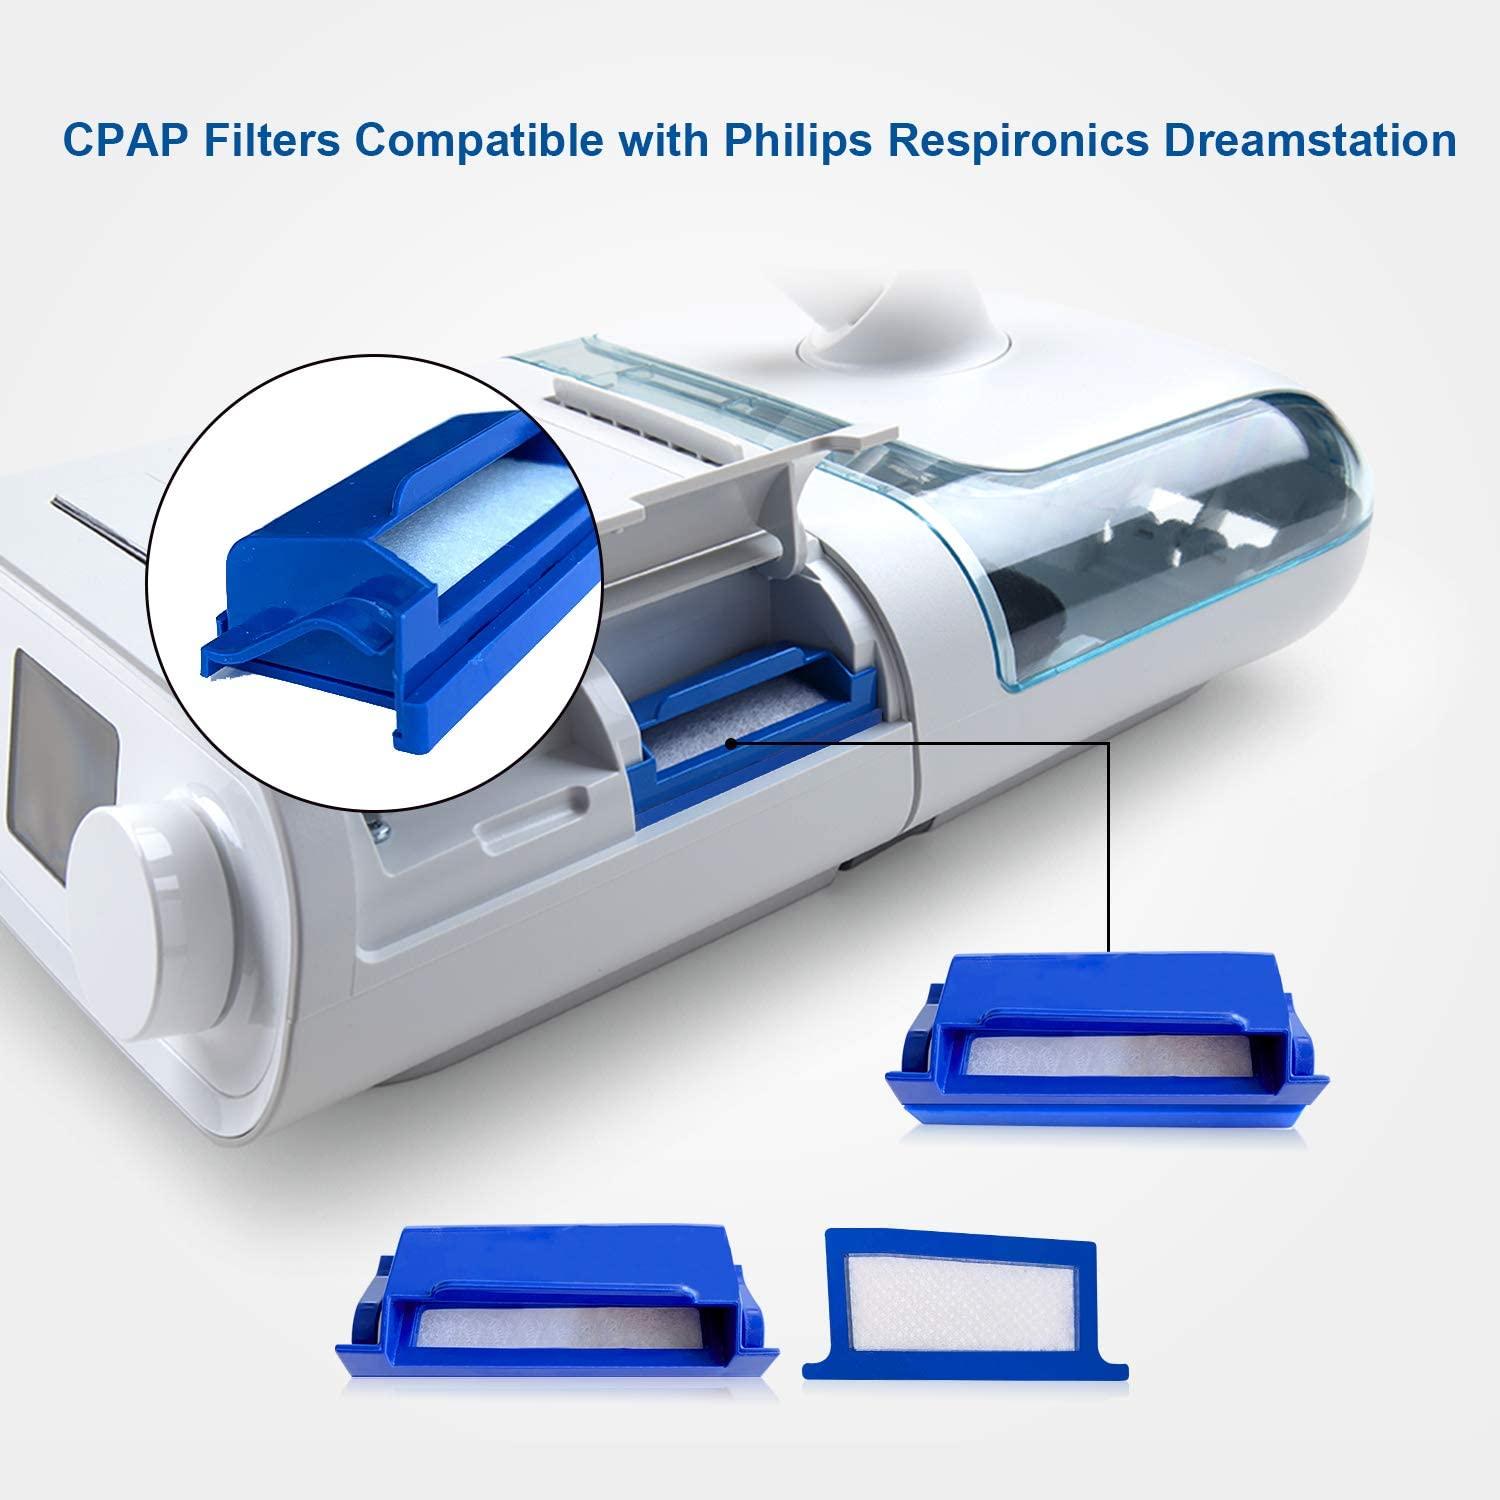 Filtre ultrafin jetable - CPAP Dreamstation Philips - Rmed